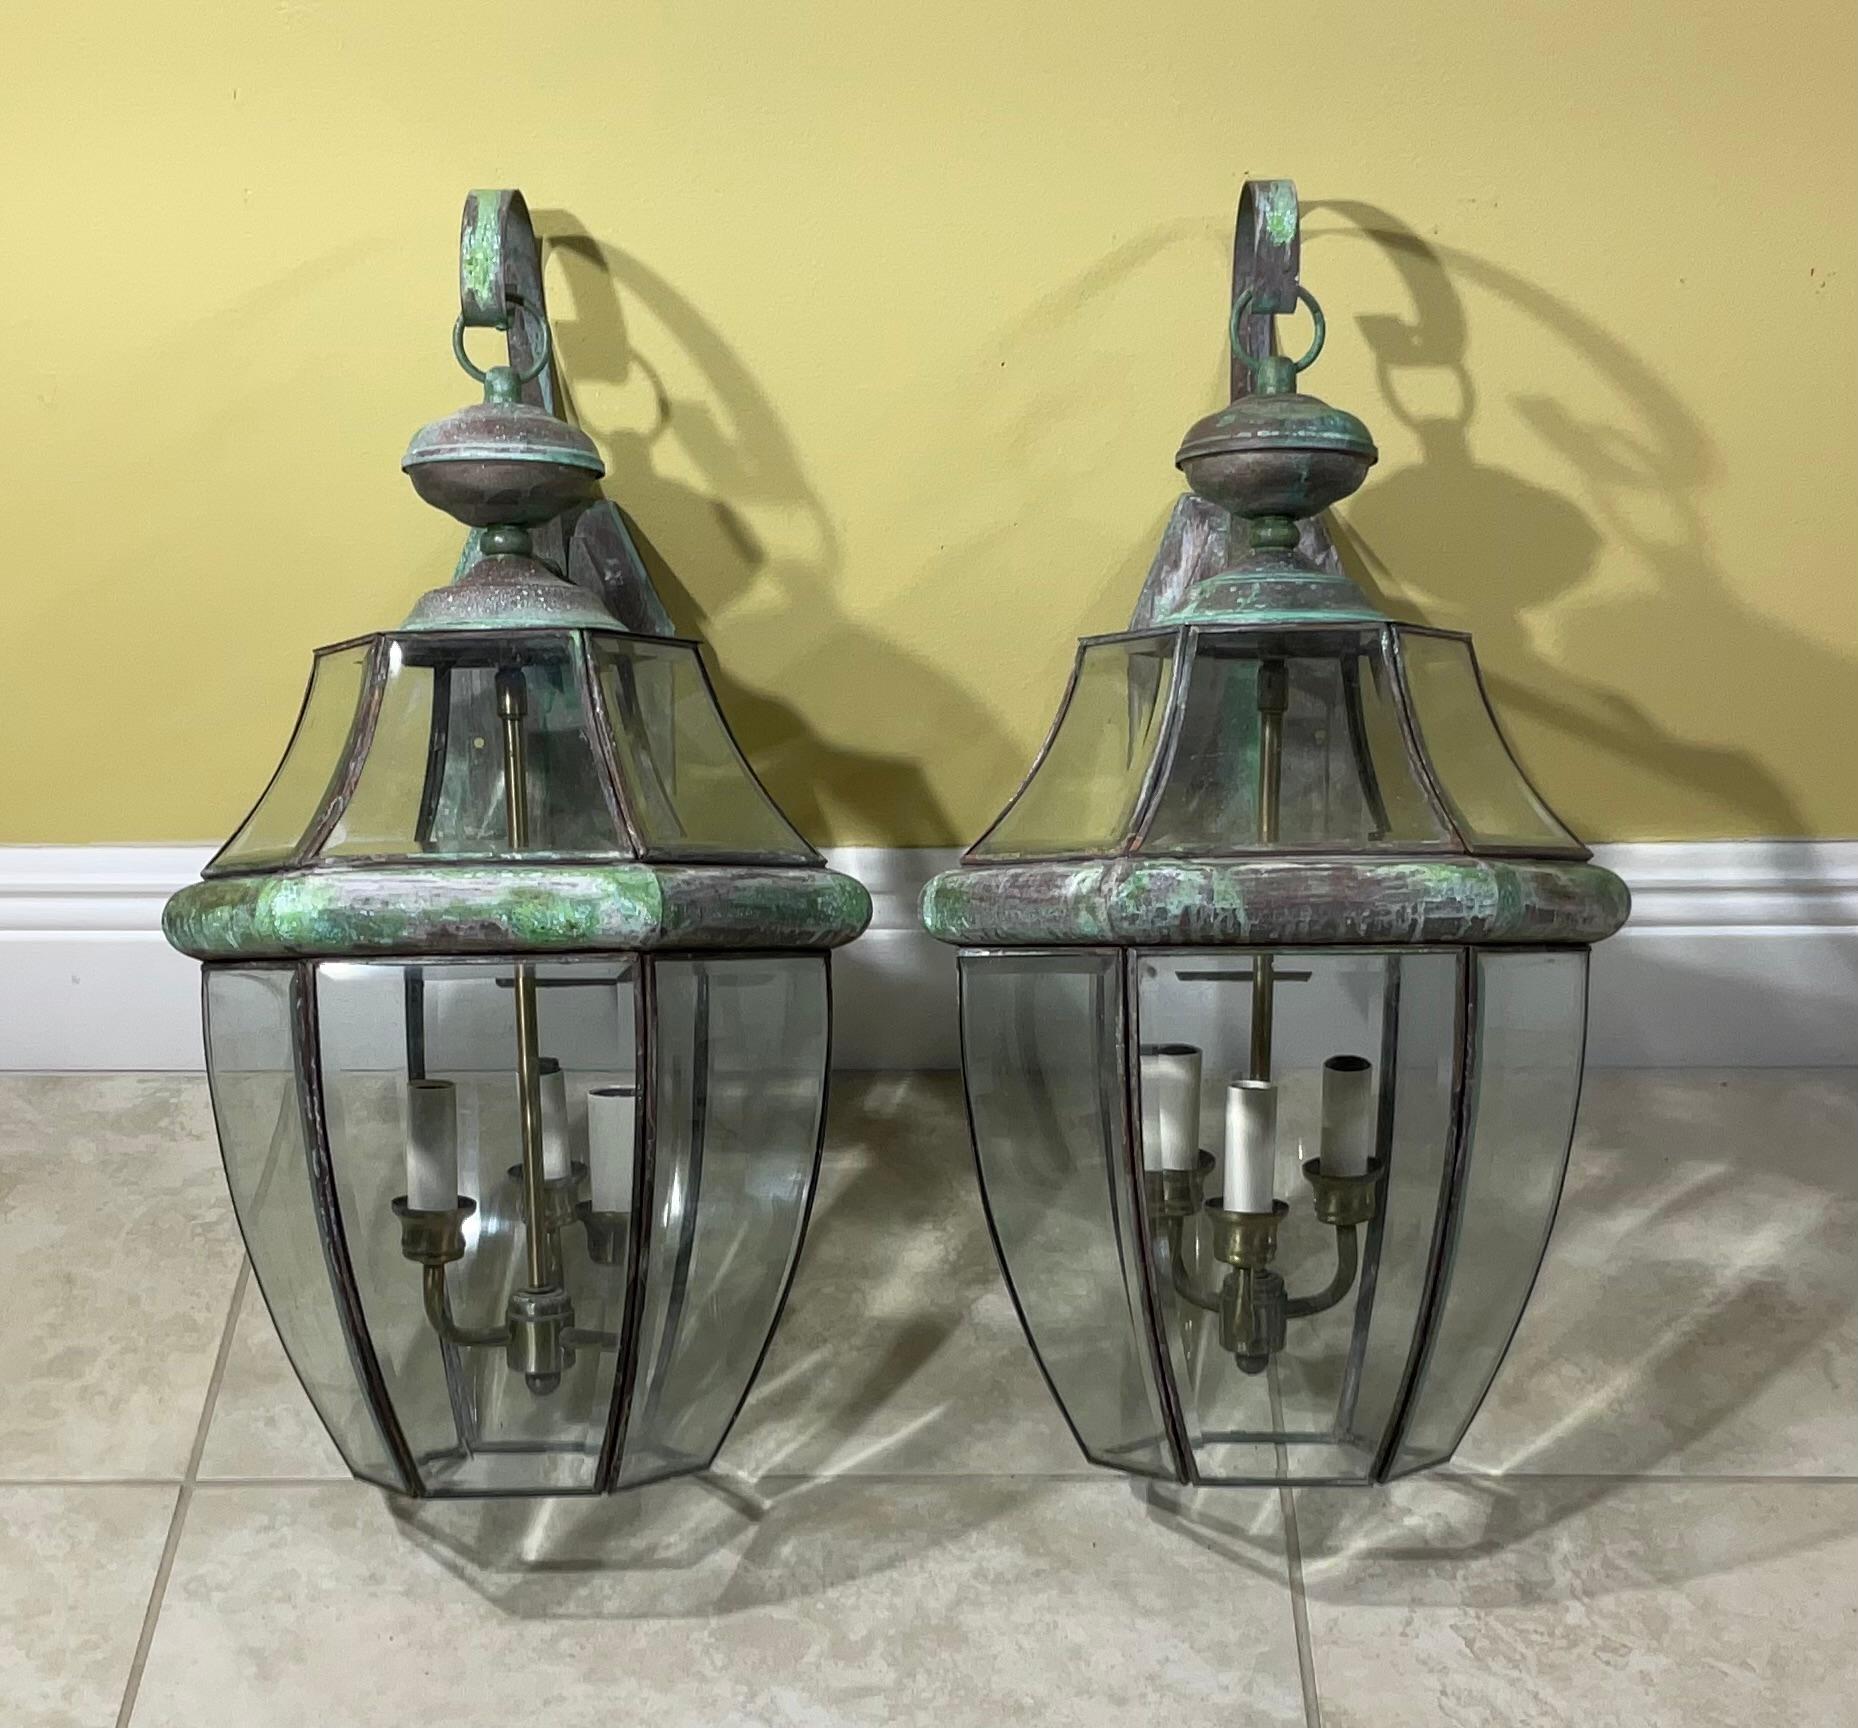 Elegant pair of wall lantern hand crafted from solid brass with three 40/watt lights each. 
 Suitable for wet locations, electrified and ready to use.
Beautiful thick beveled glass.
Decorative pair of lantern indoor or outdoor.